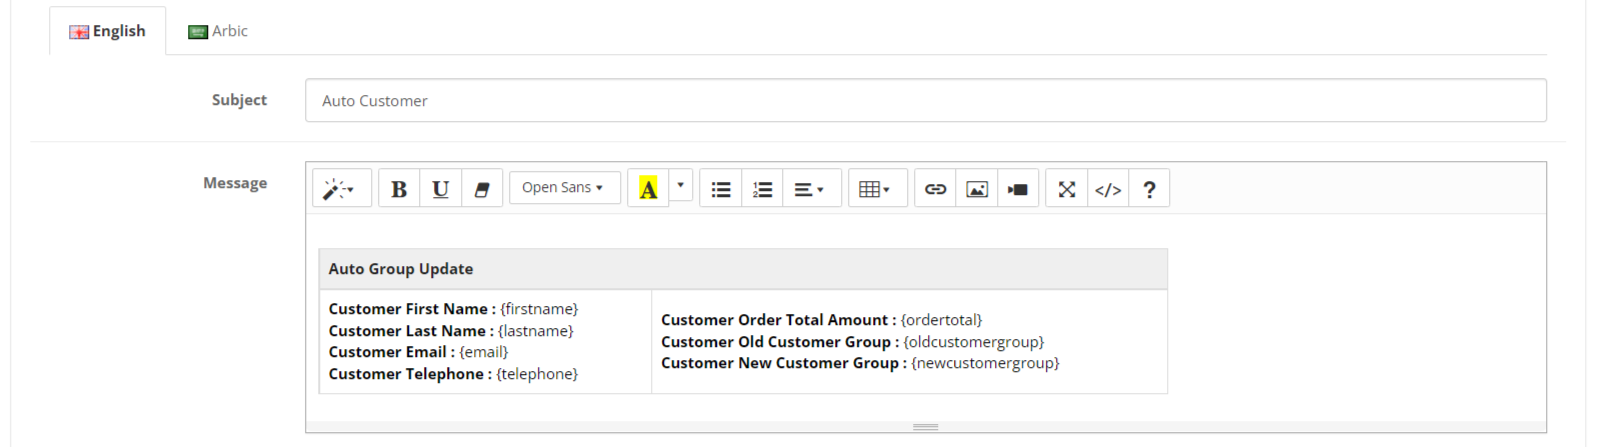 email template for auto customer group  in opencart